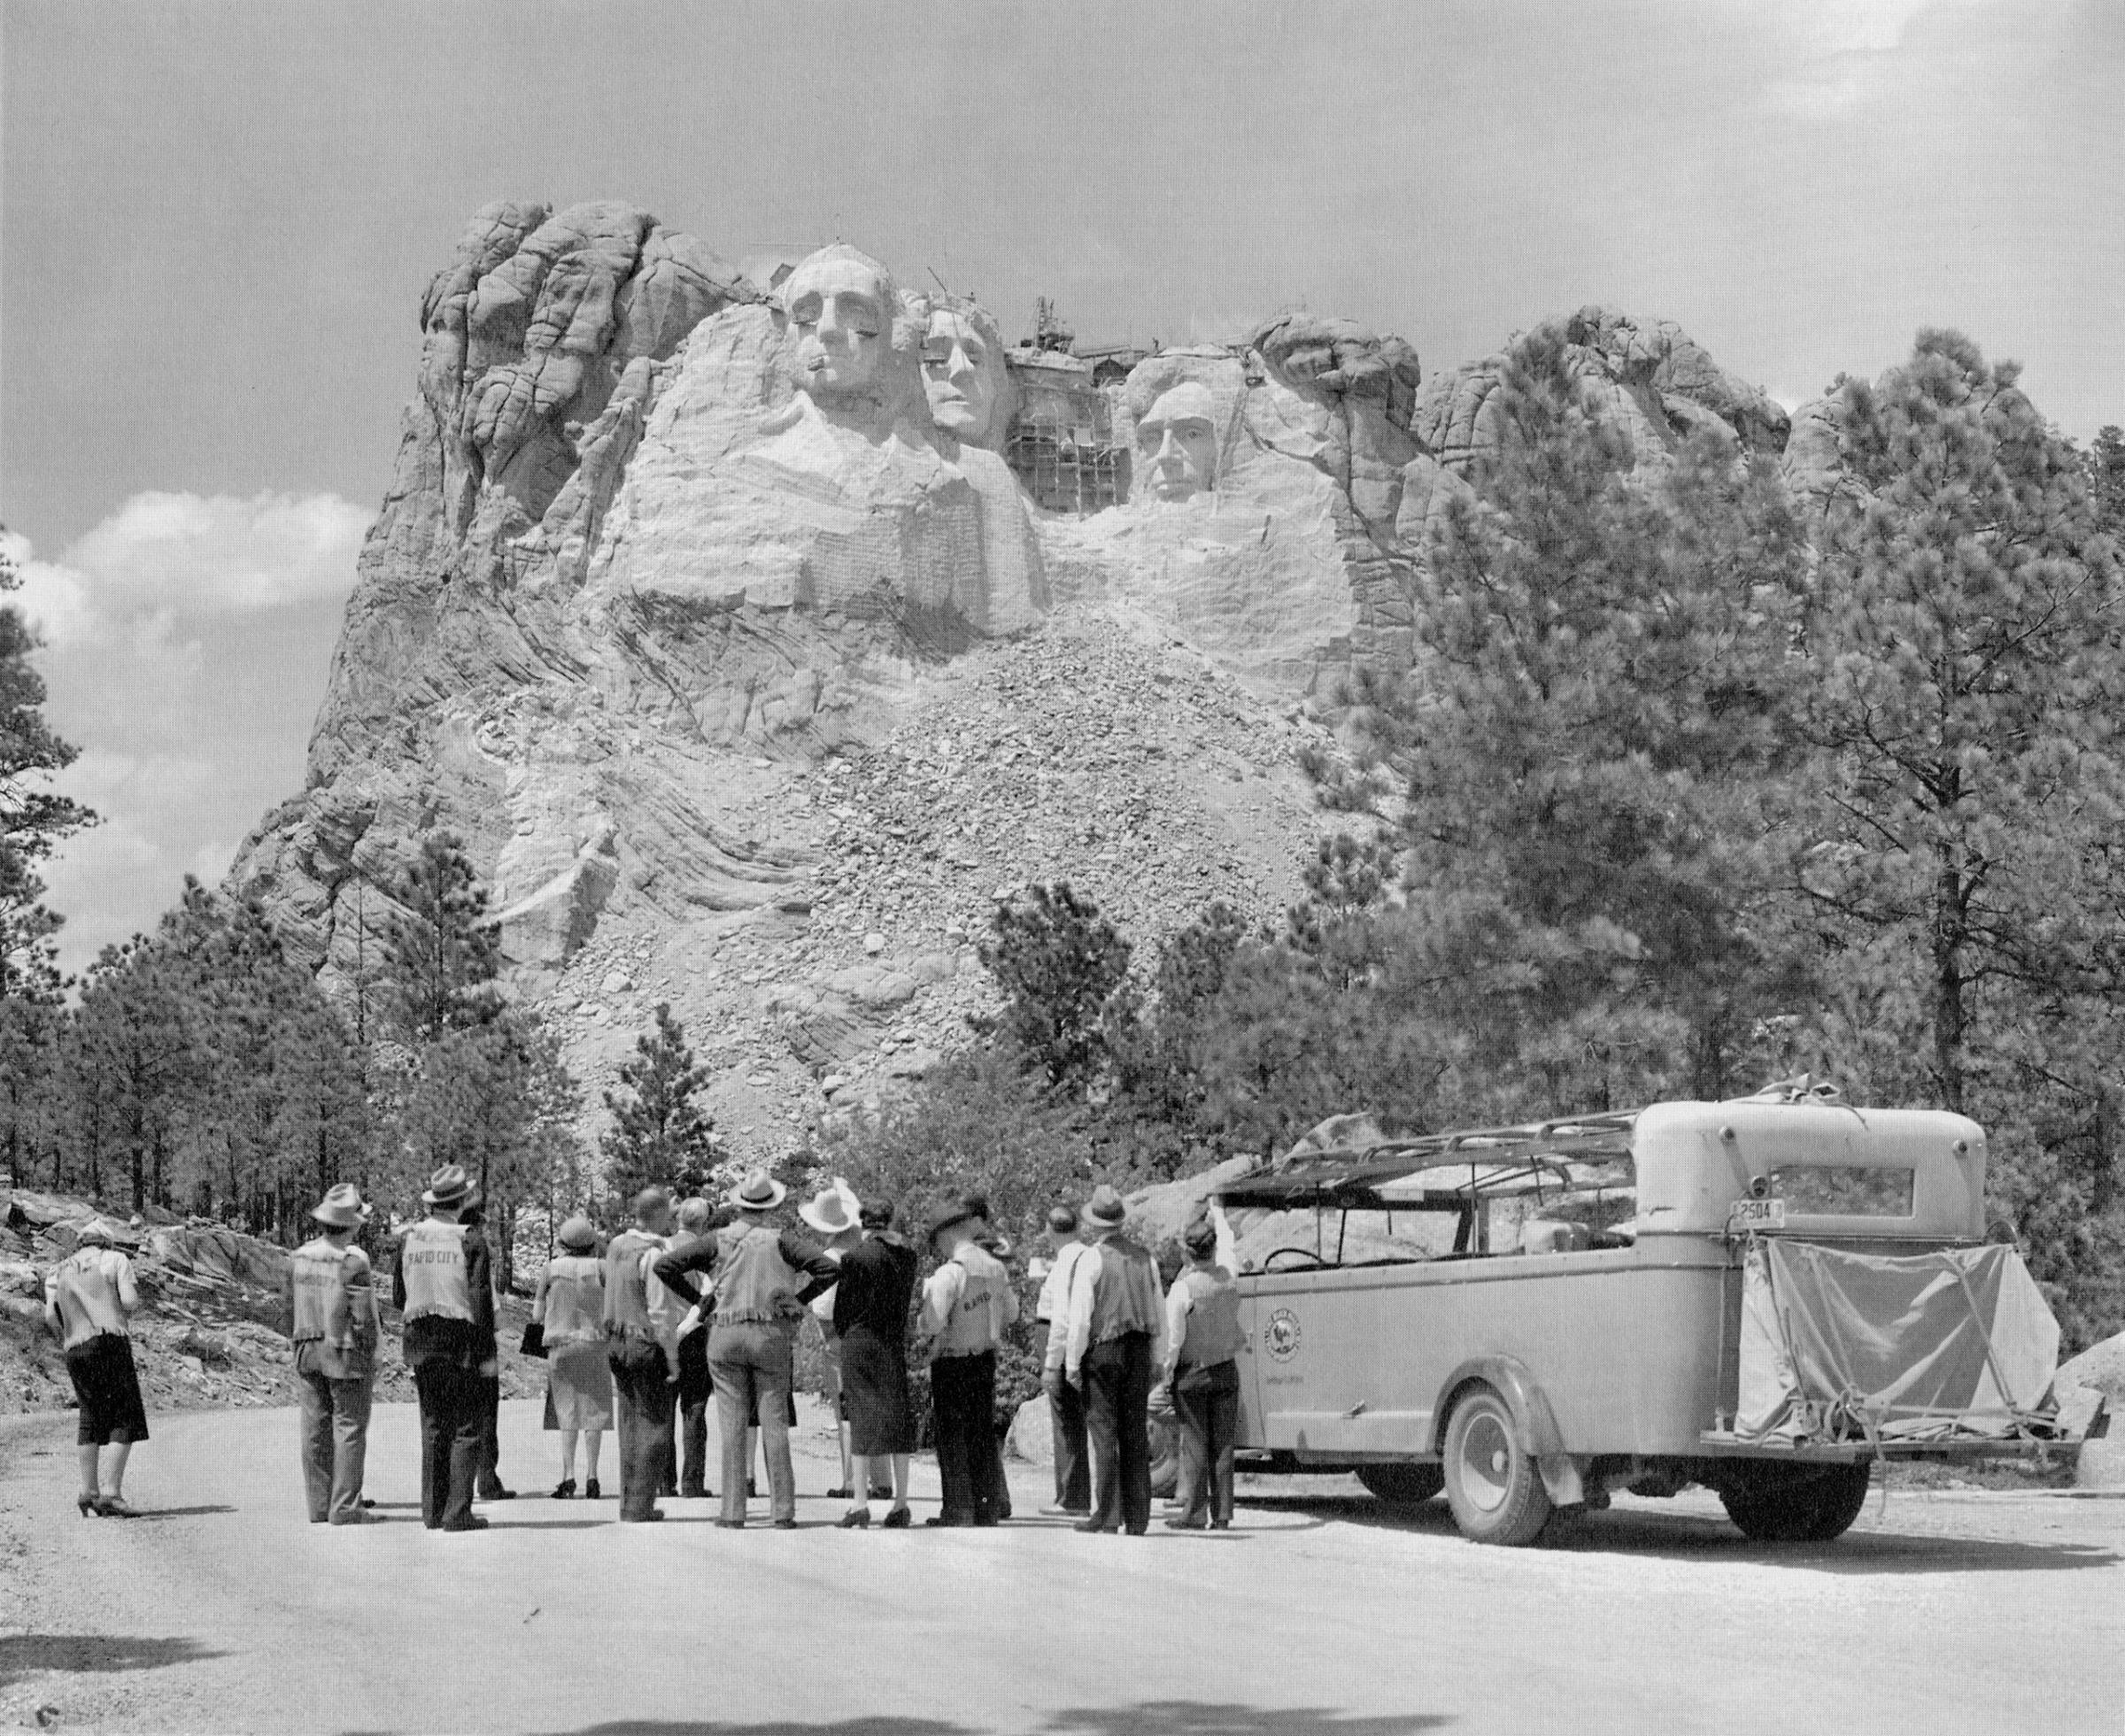 Tourists stopped to view Mount Rushmore while it was still under construction, c. 1930s.